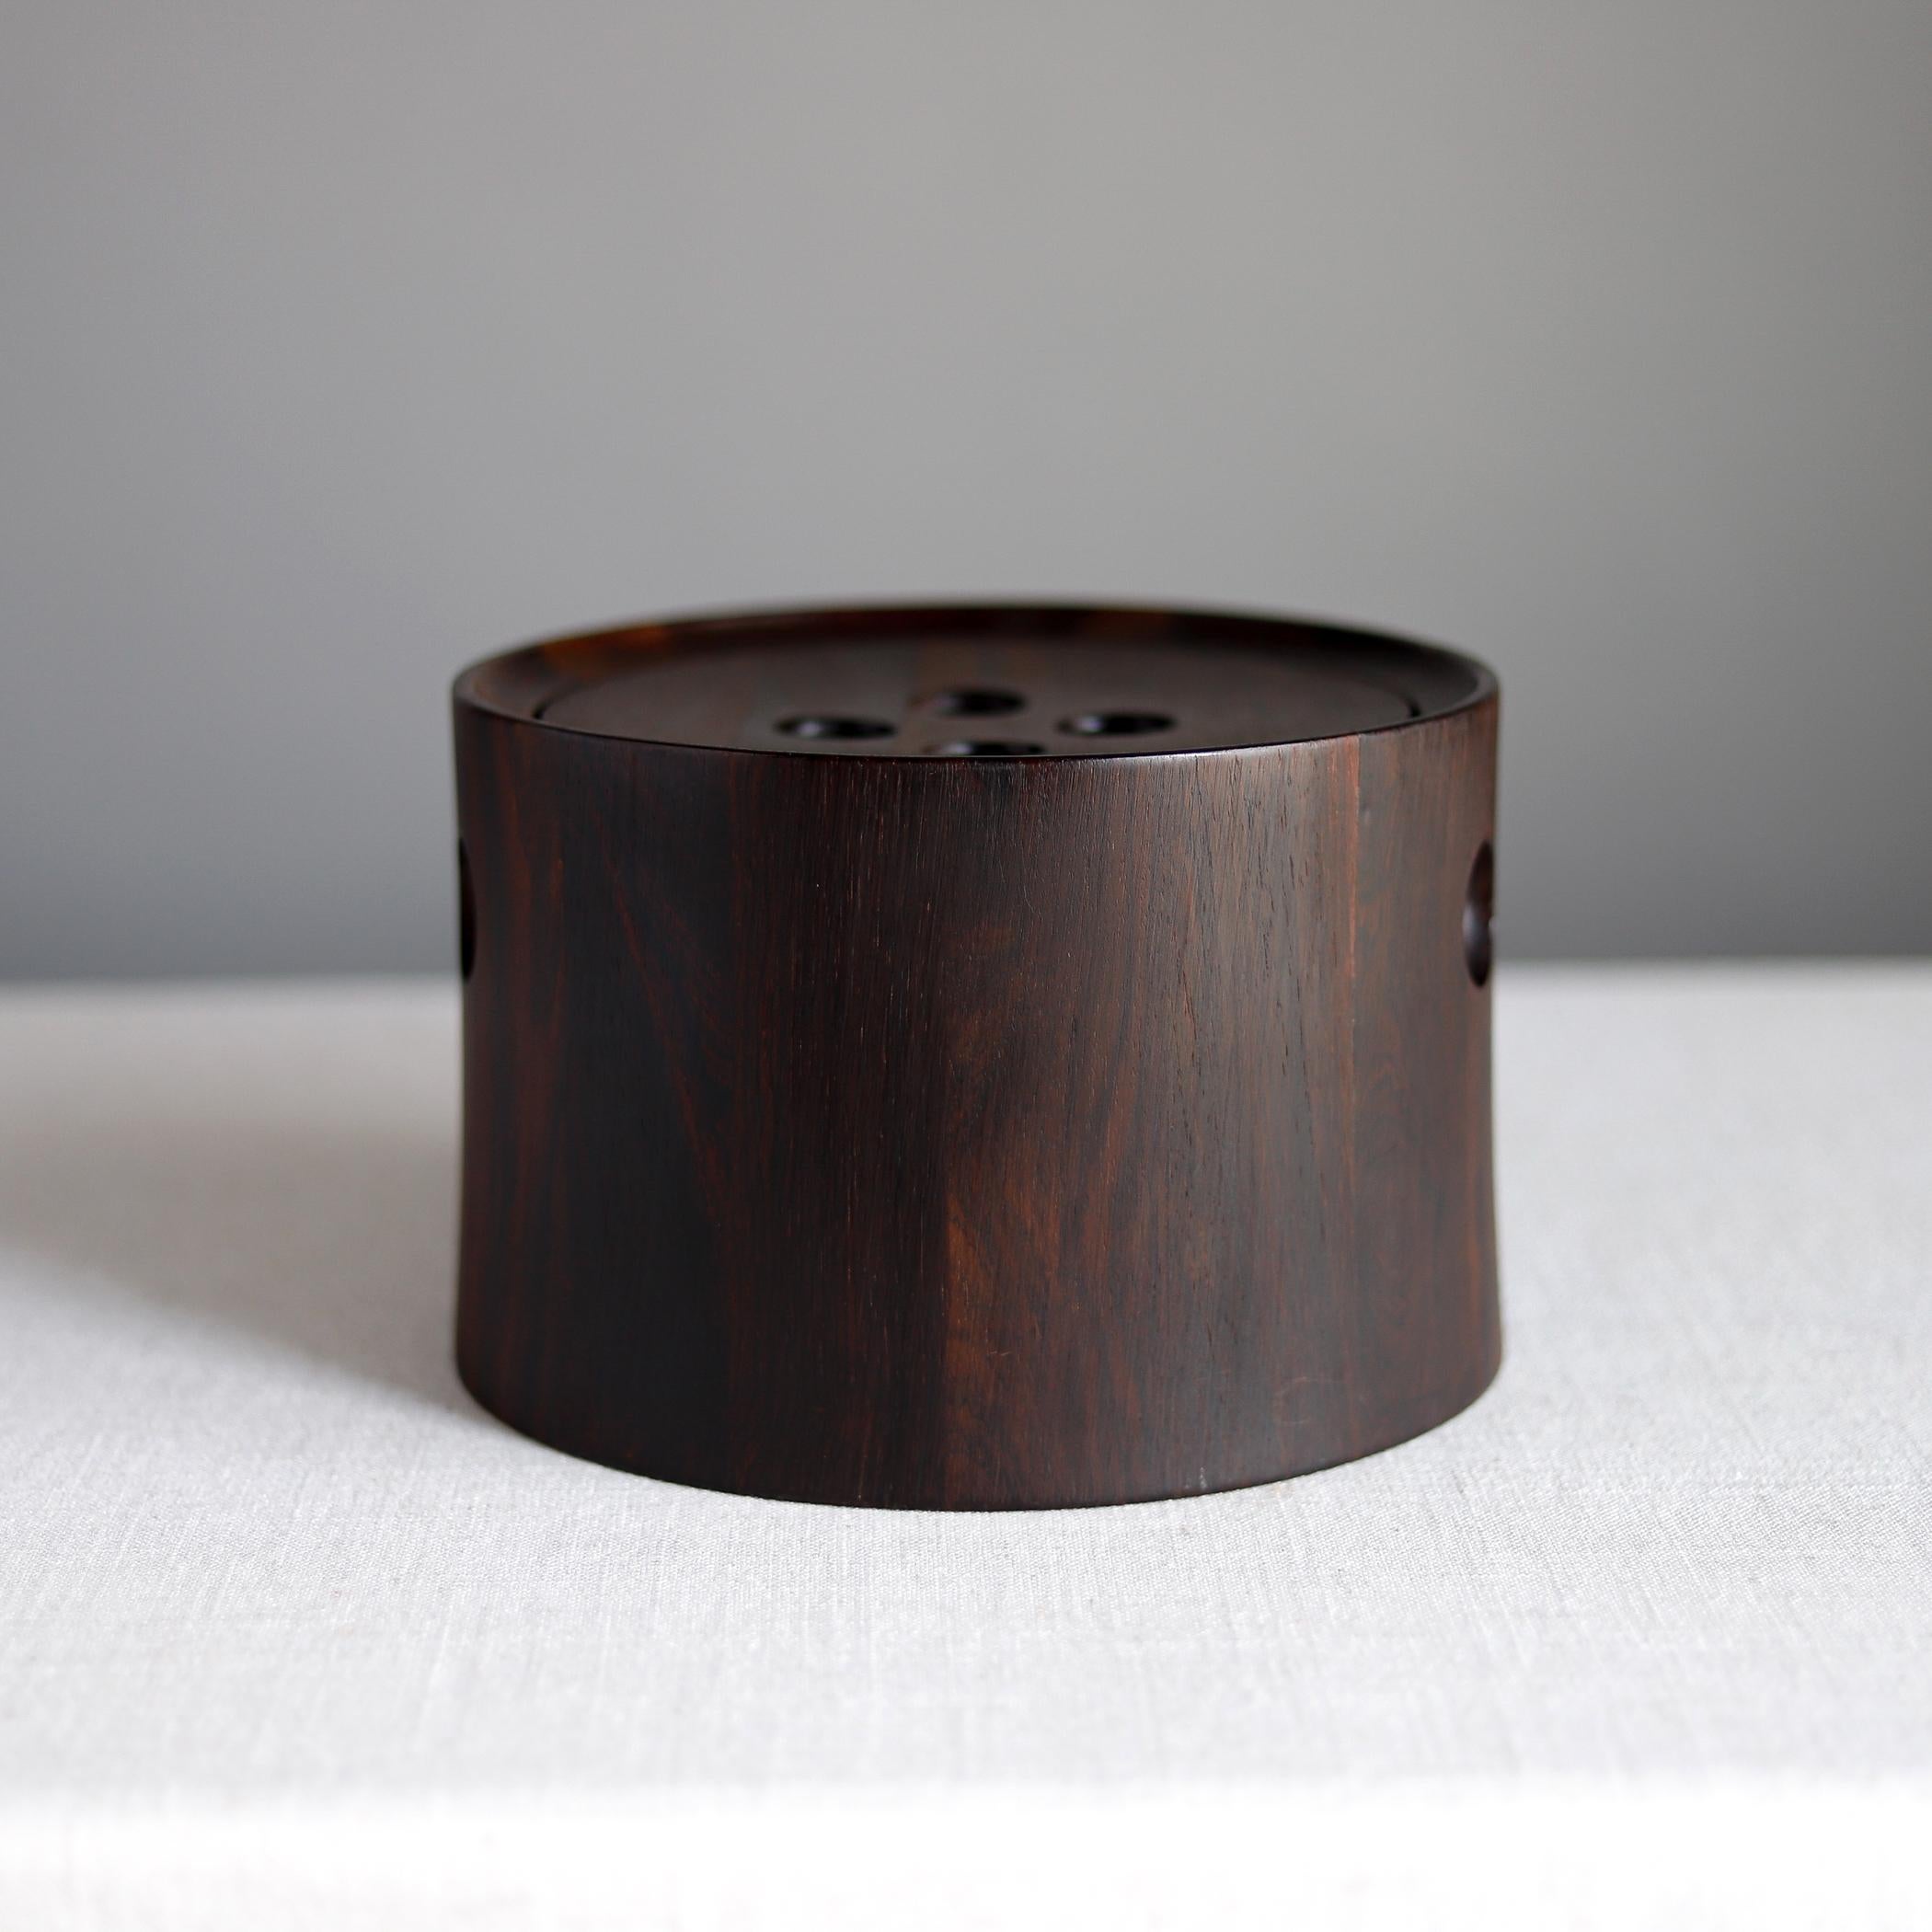 Staved rosewood ice bucket was made by Nissen. The lid and sides have recessed circles that serve as handles. The bucket retains its original black plastic liner and could be used for ice, or for keeping appetizers warm. 

Measures about 5 3/4